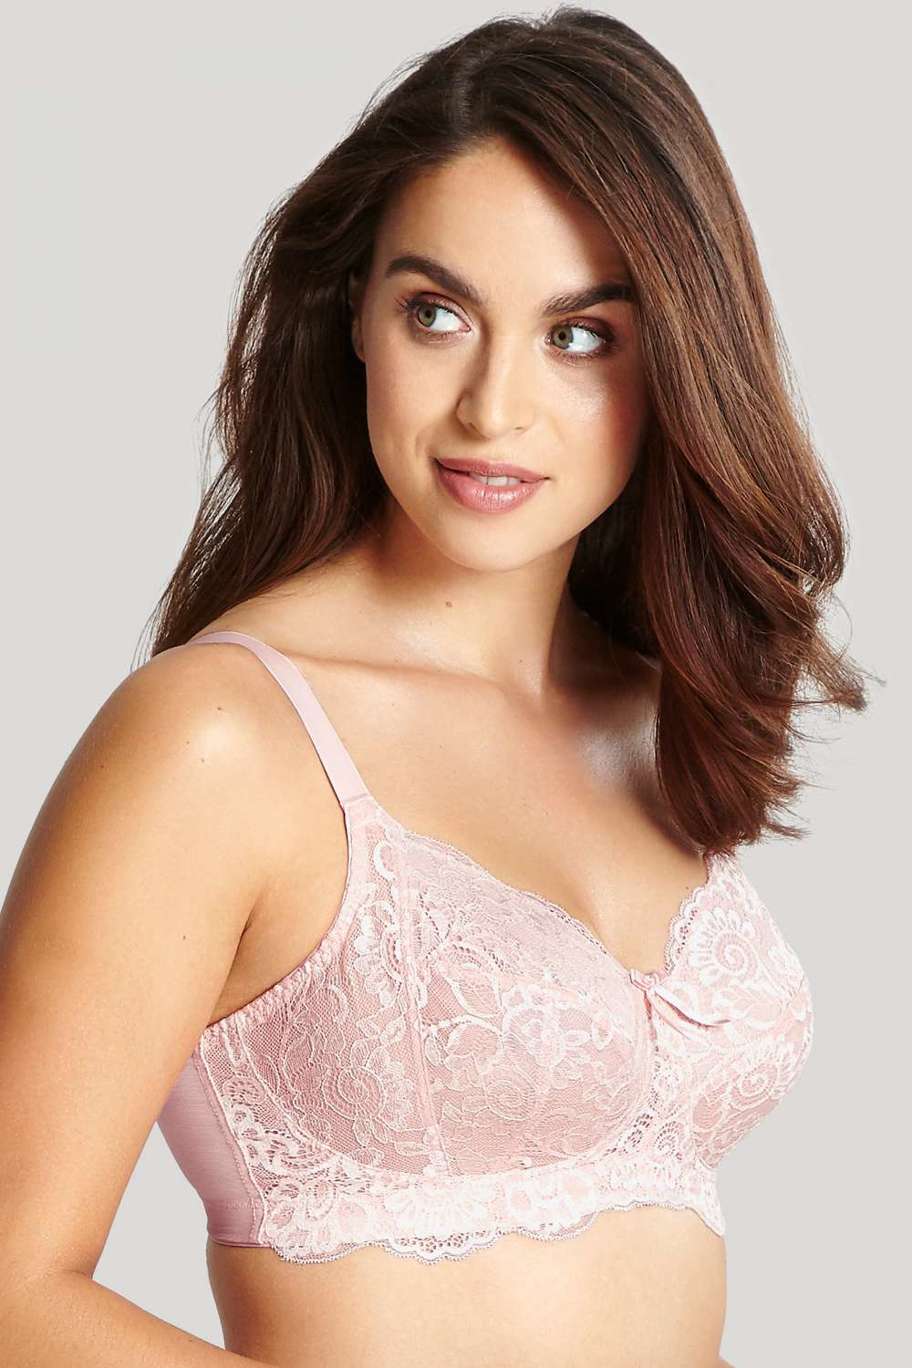 Panache Lingerie Andorra Full Cup Bra Warm Taupe Lace Bras 5675 or Short  5674